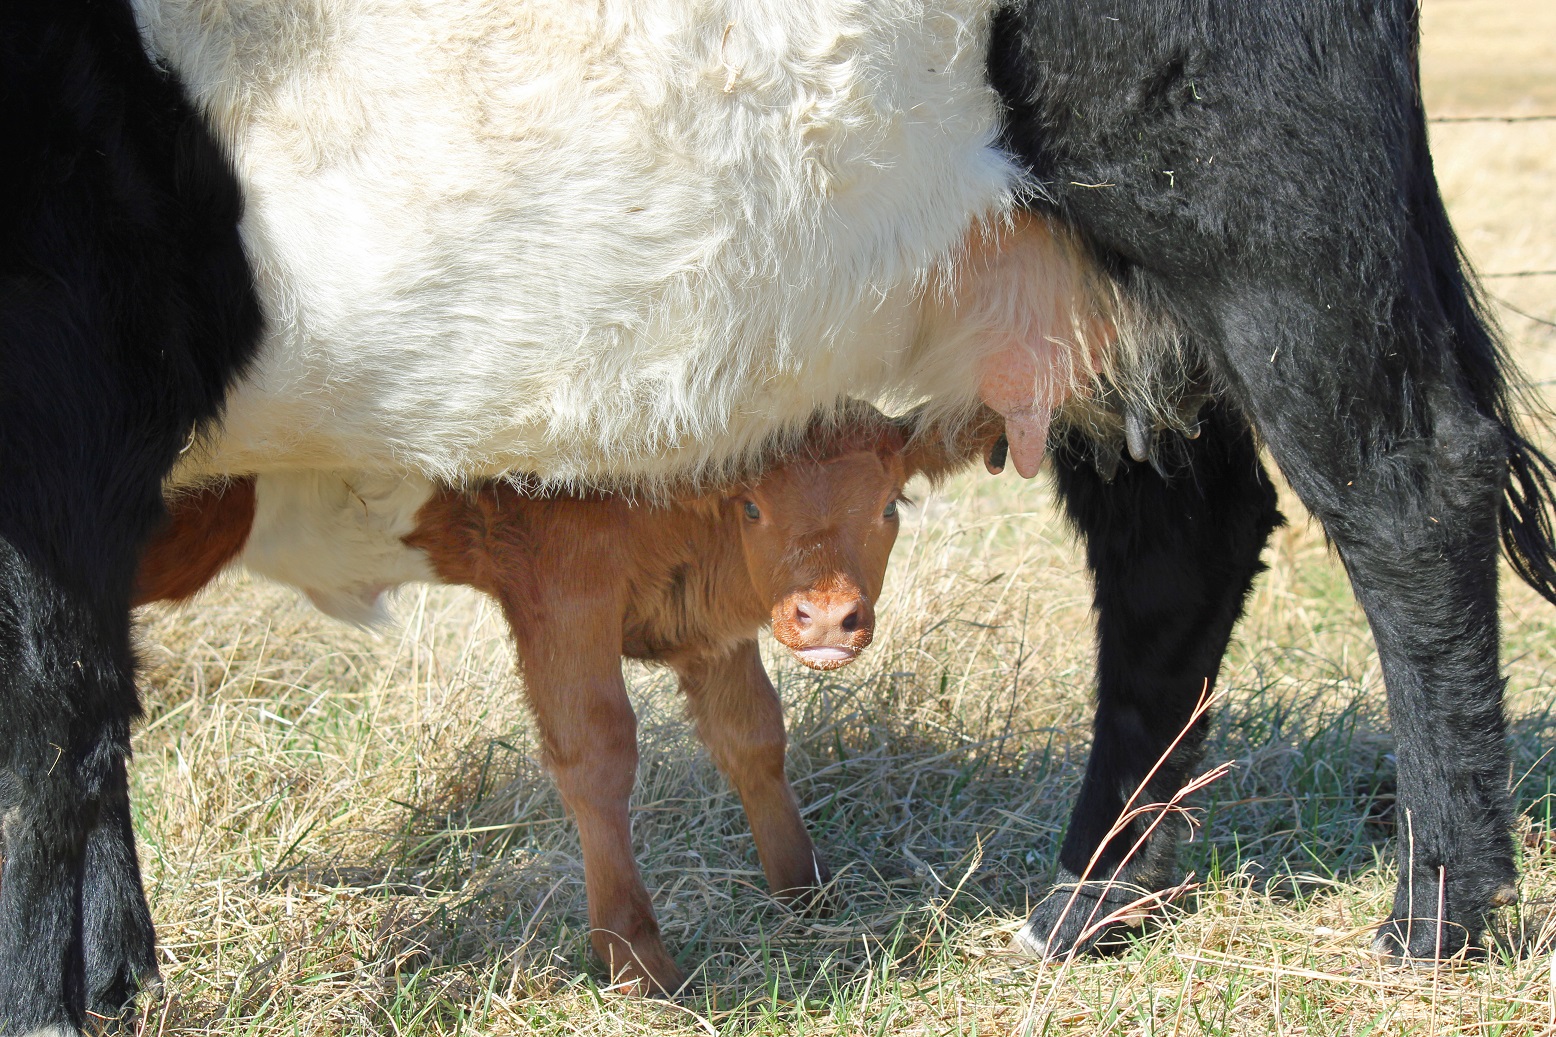 calf peeking out from under the mother cow's belly